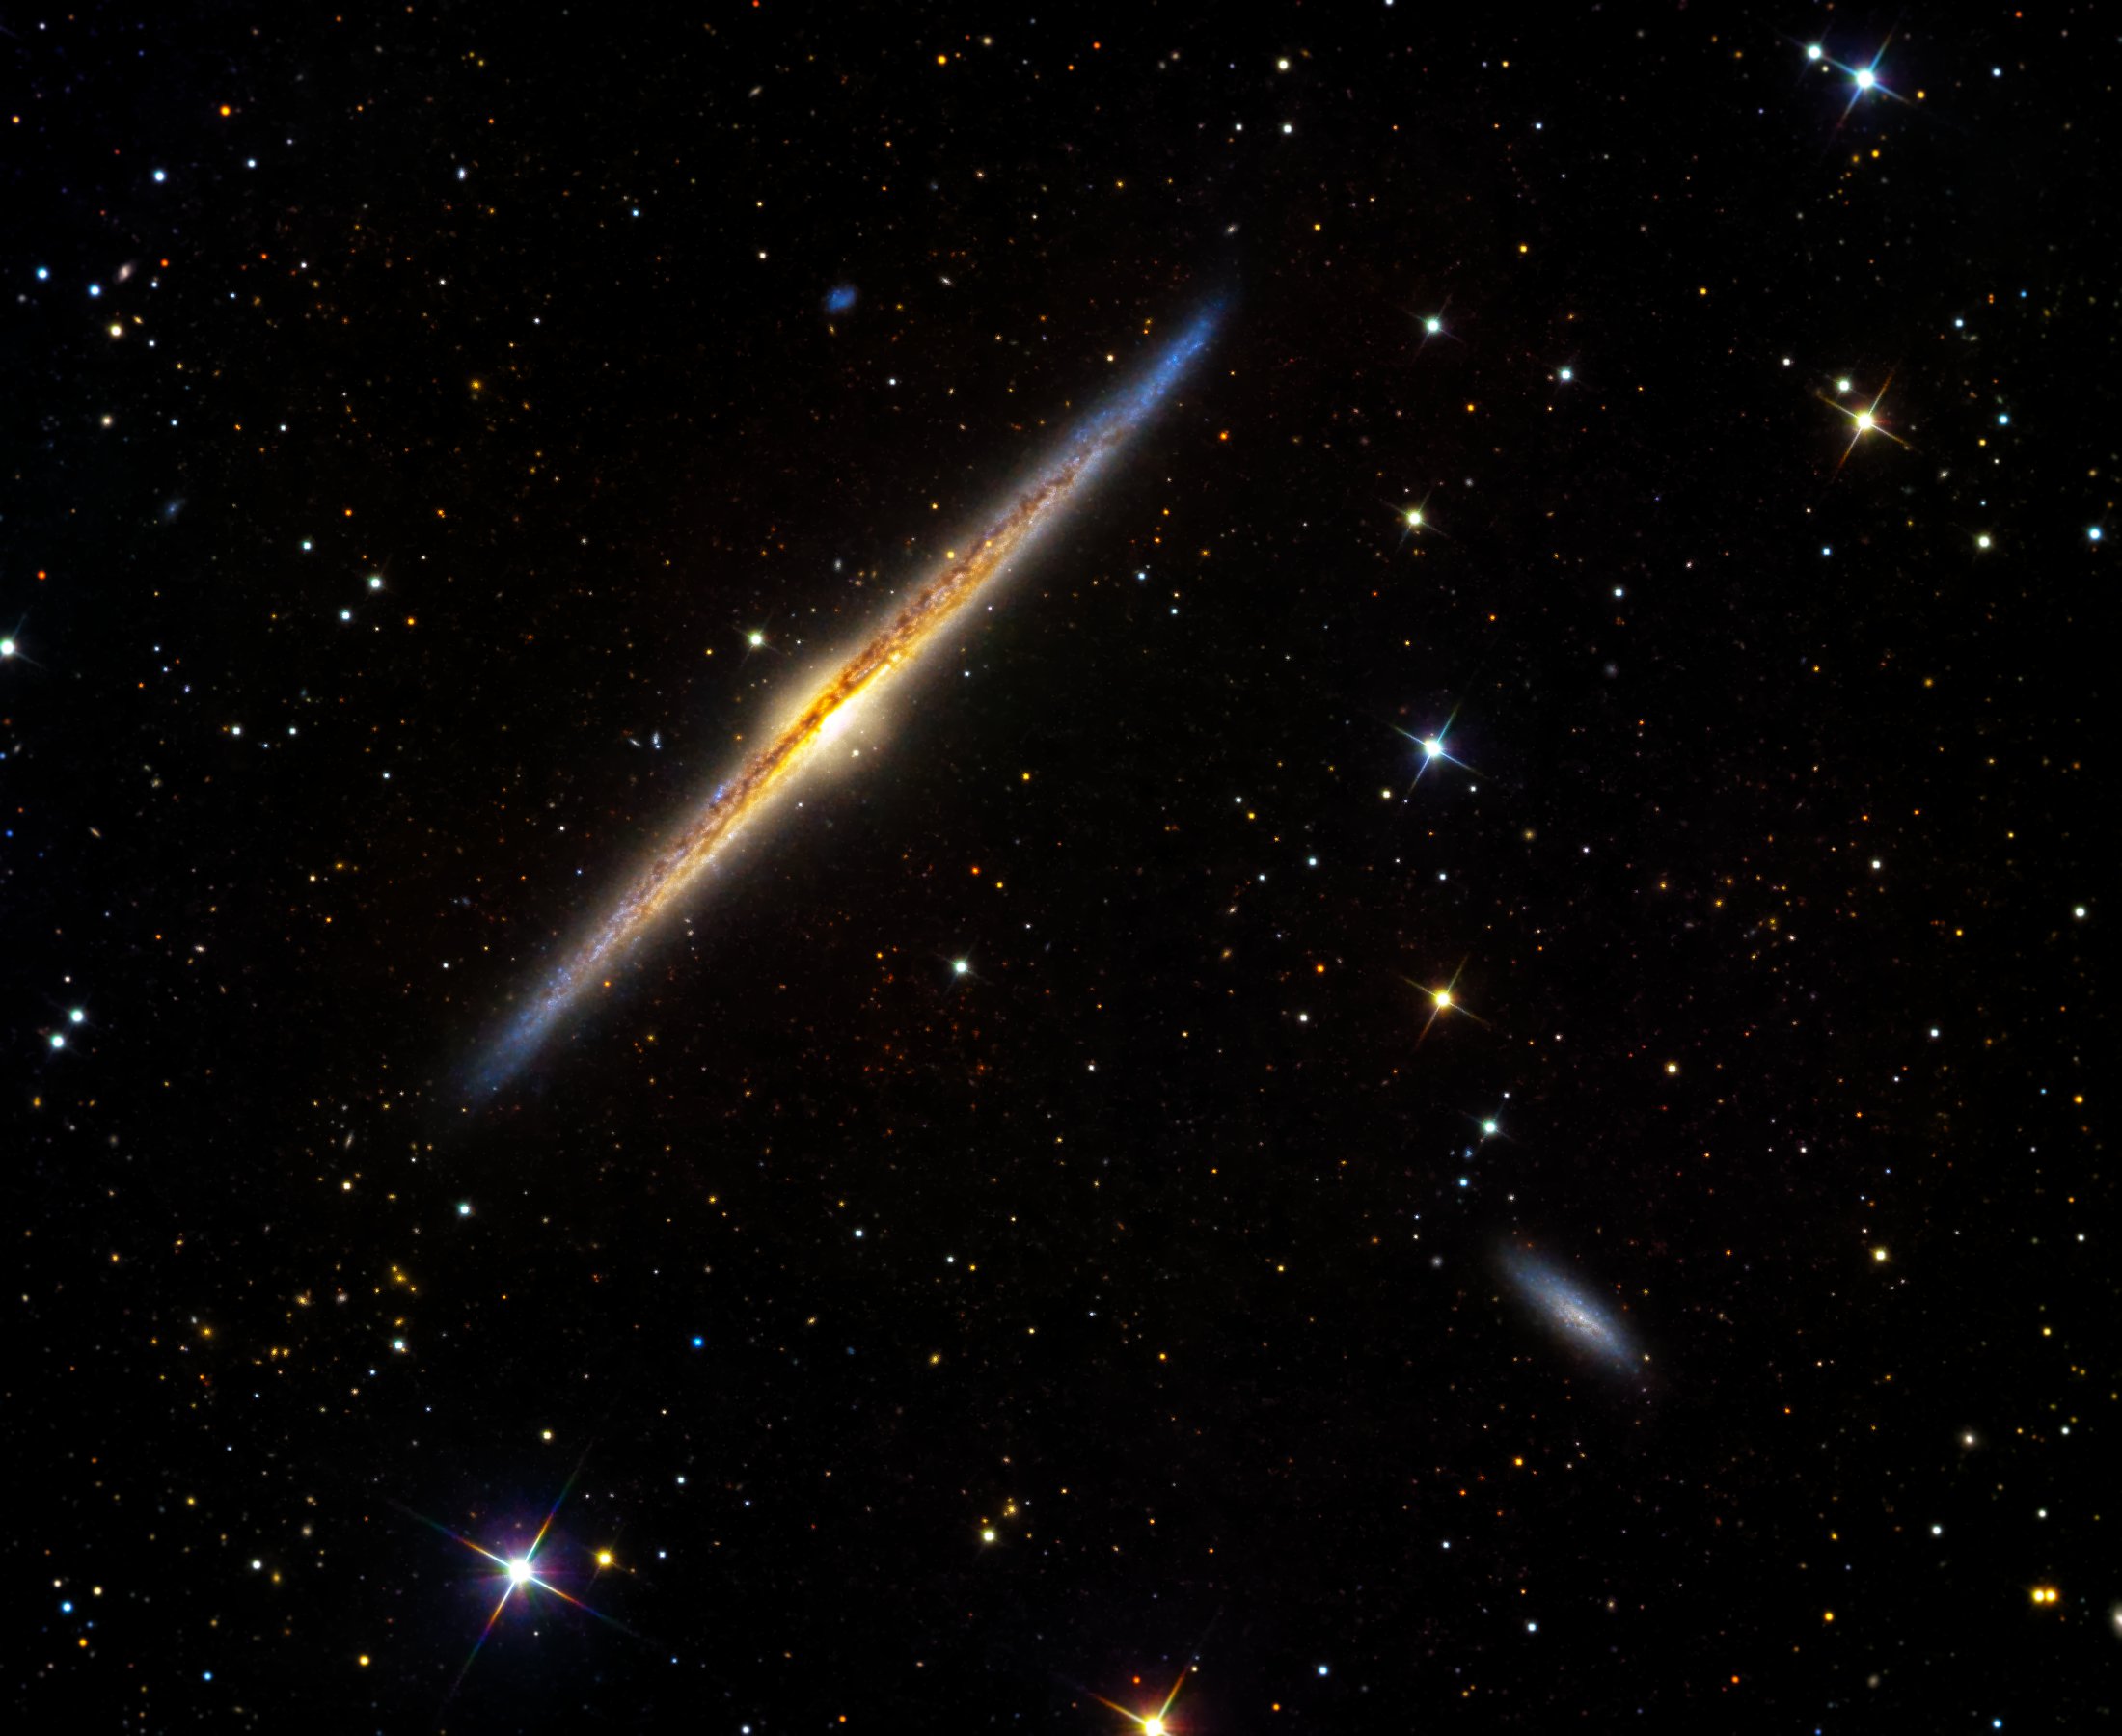 NGC 4565 (Caldwell 38) and NGC 4562 in continuum light